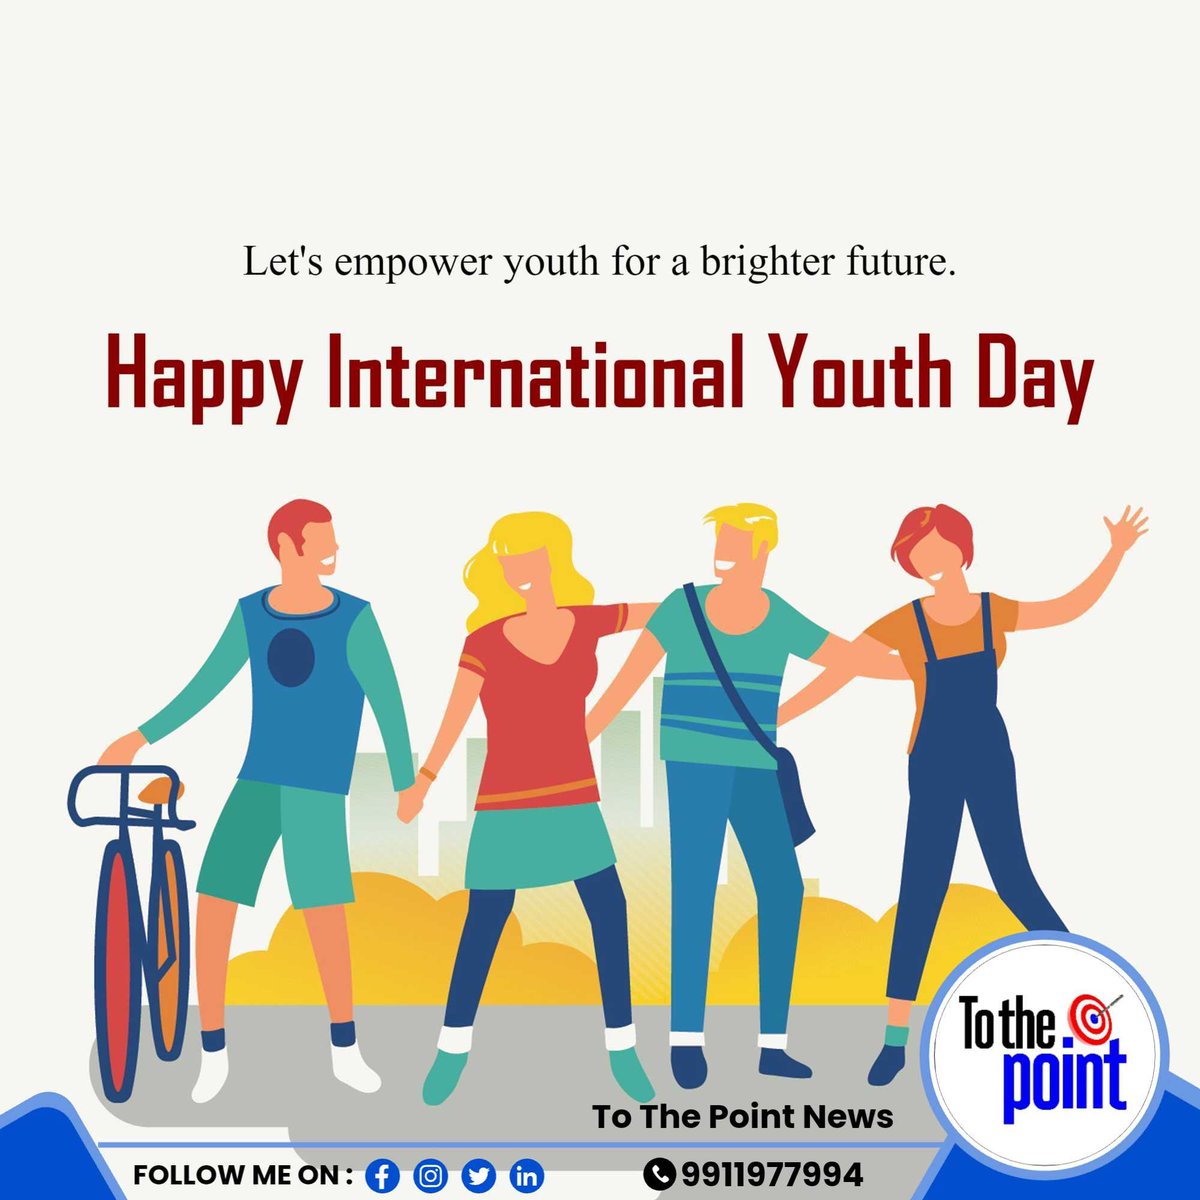 Greetings from To The Point News
#YouthPower #happyyouthday #YouthActivism #YouthEducation #YouthLeadership #communication #YouthChangeMakers #YouthEngagement #GlobalYouth #InternationalYouthDay